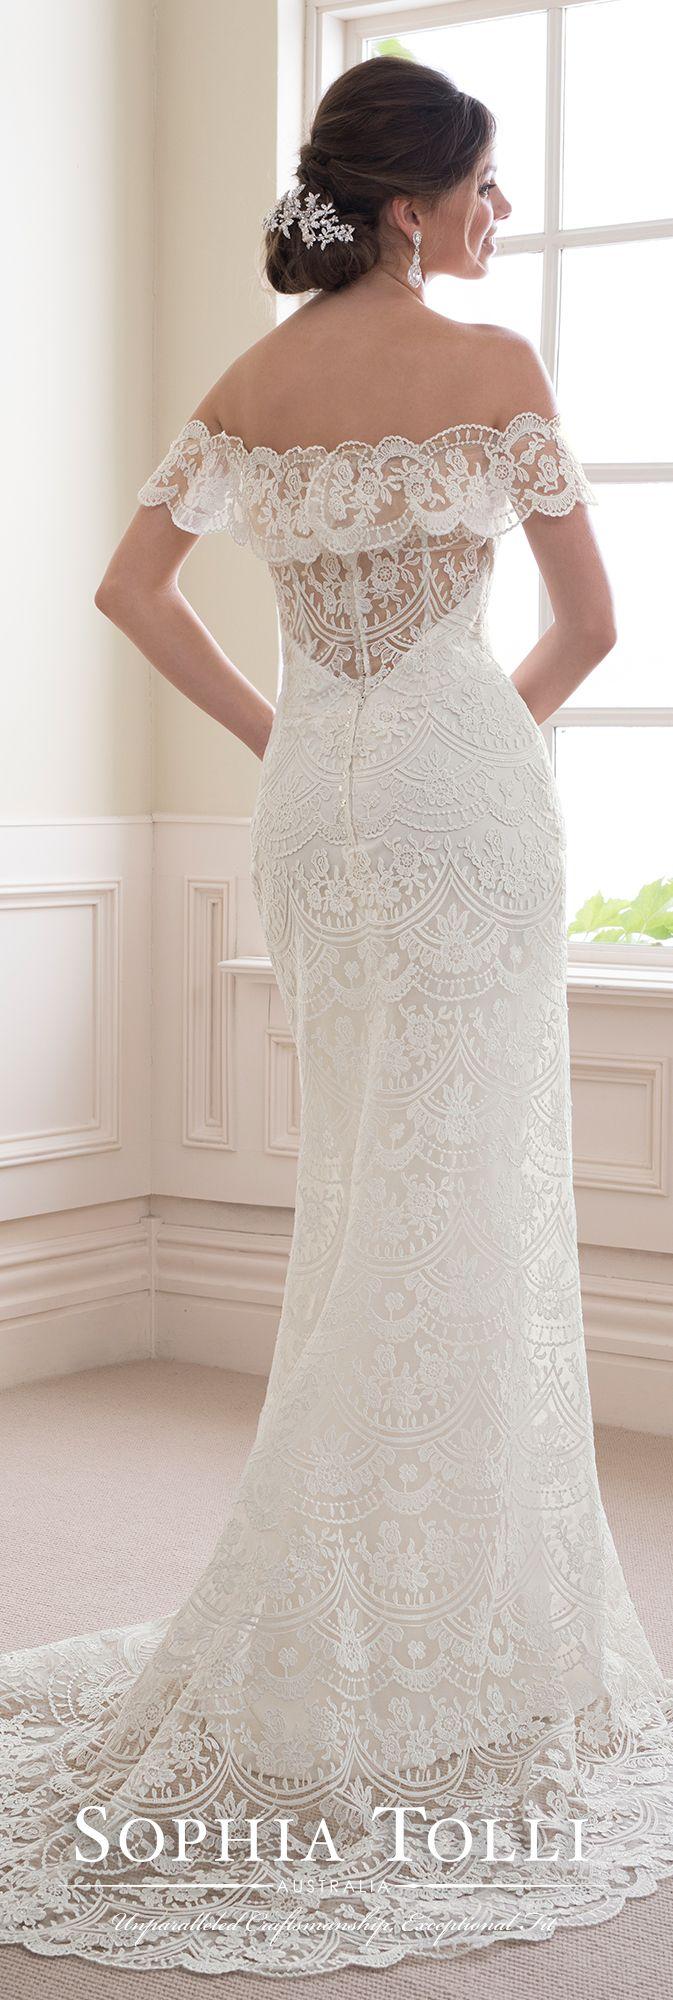 Mariage - Lightweight Boho Wedding Dress With Off-Shoulder Lace Straps